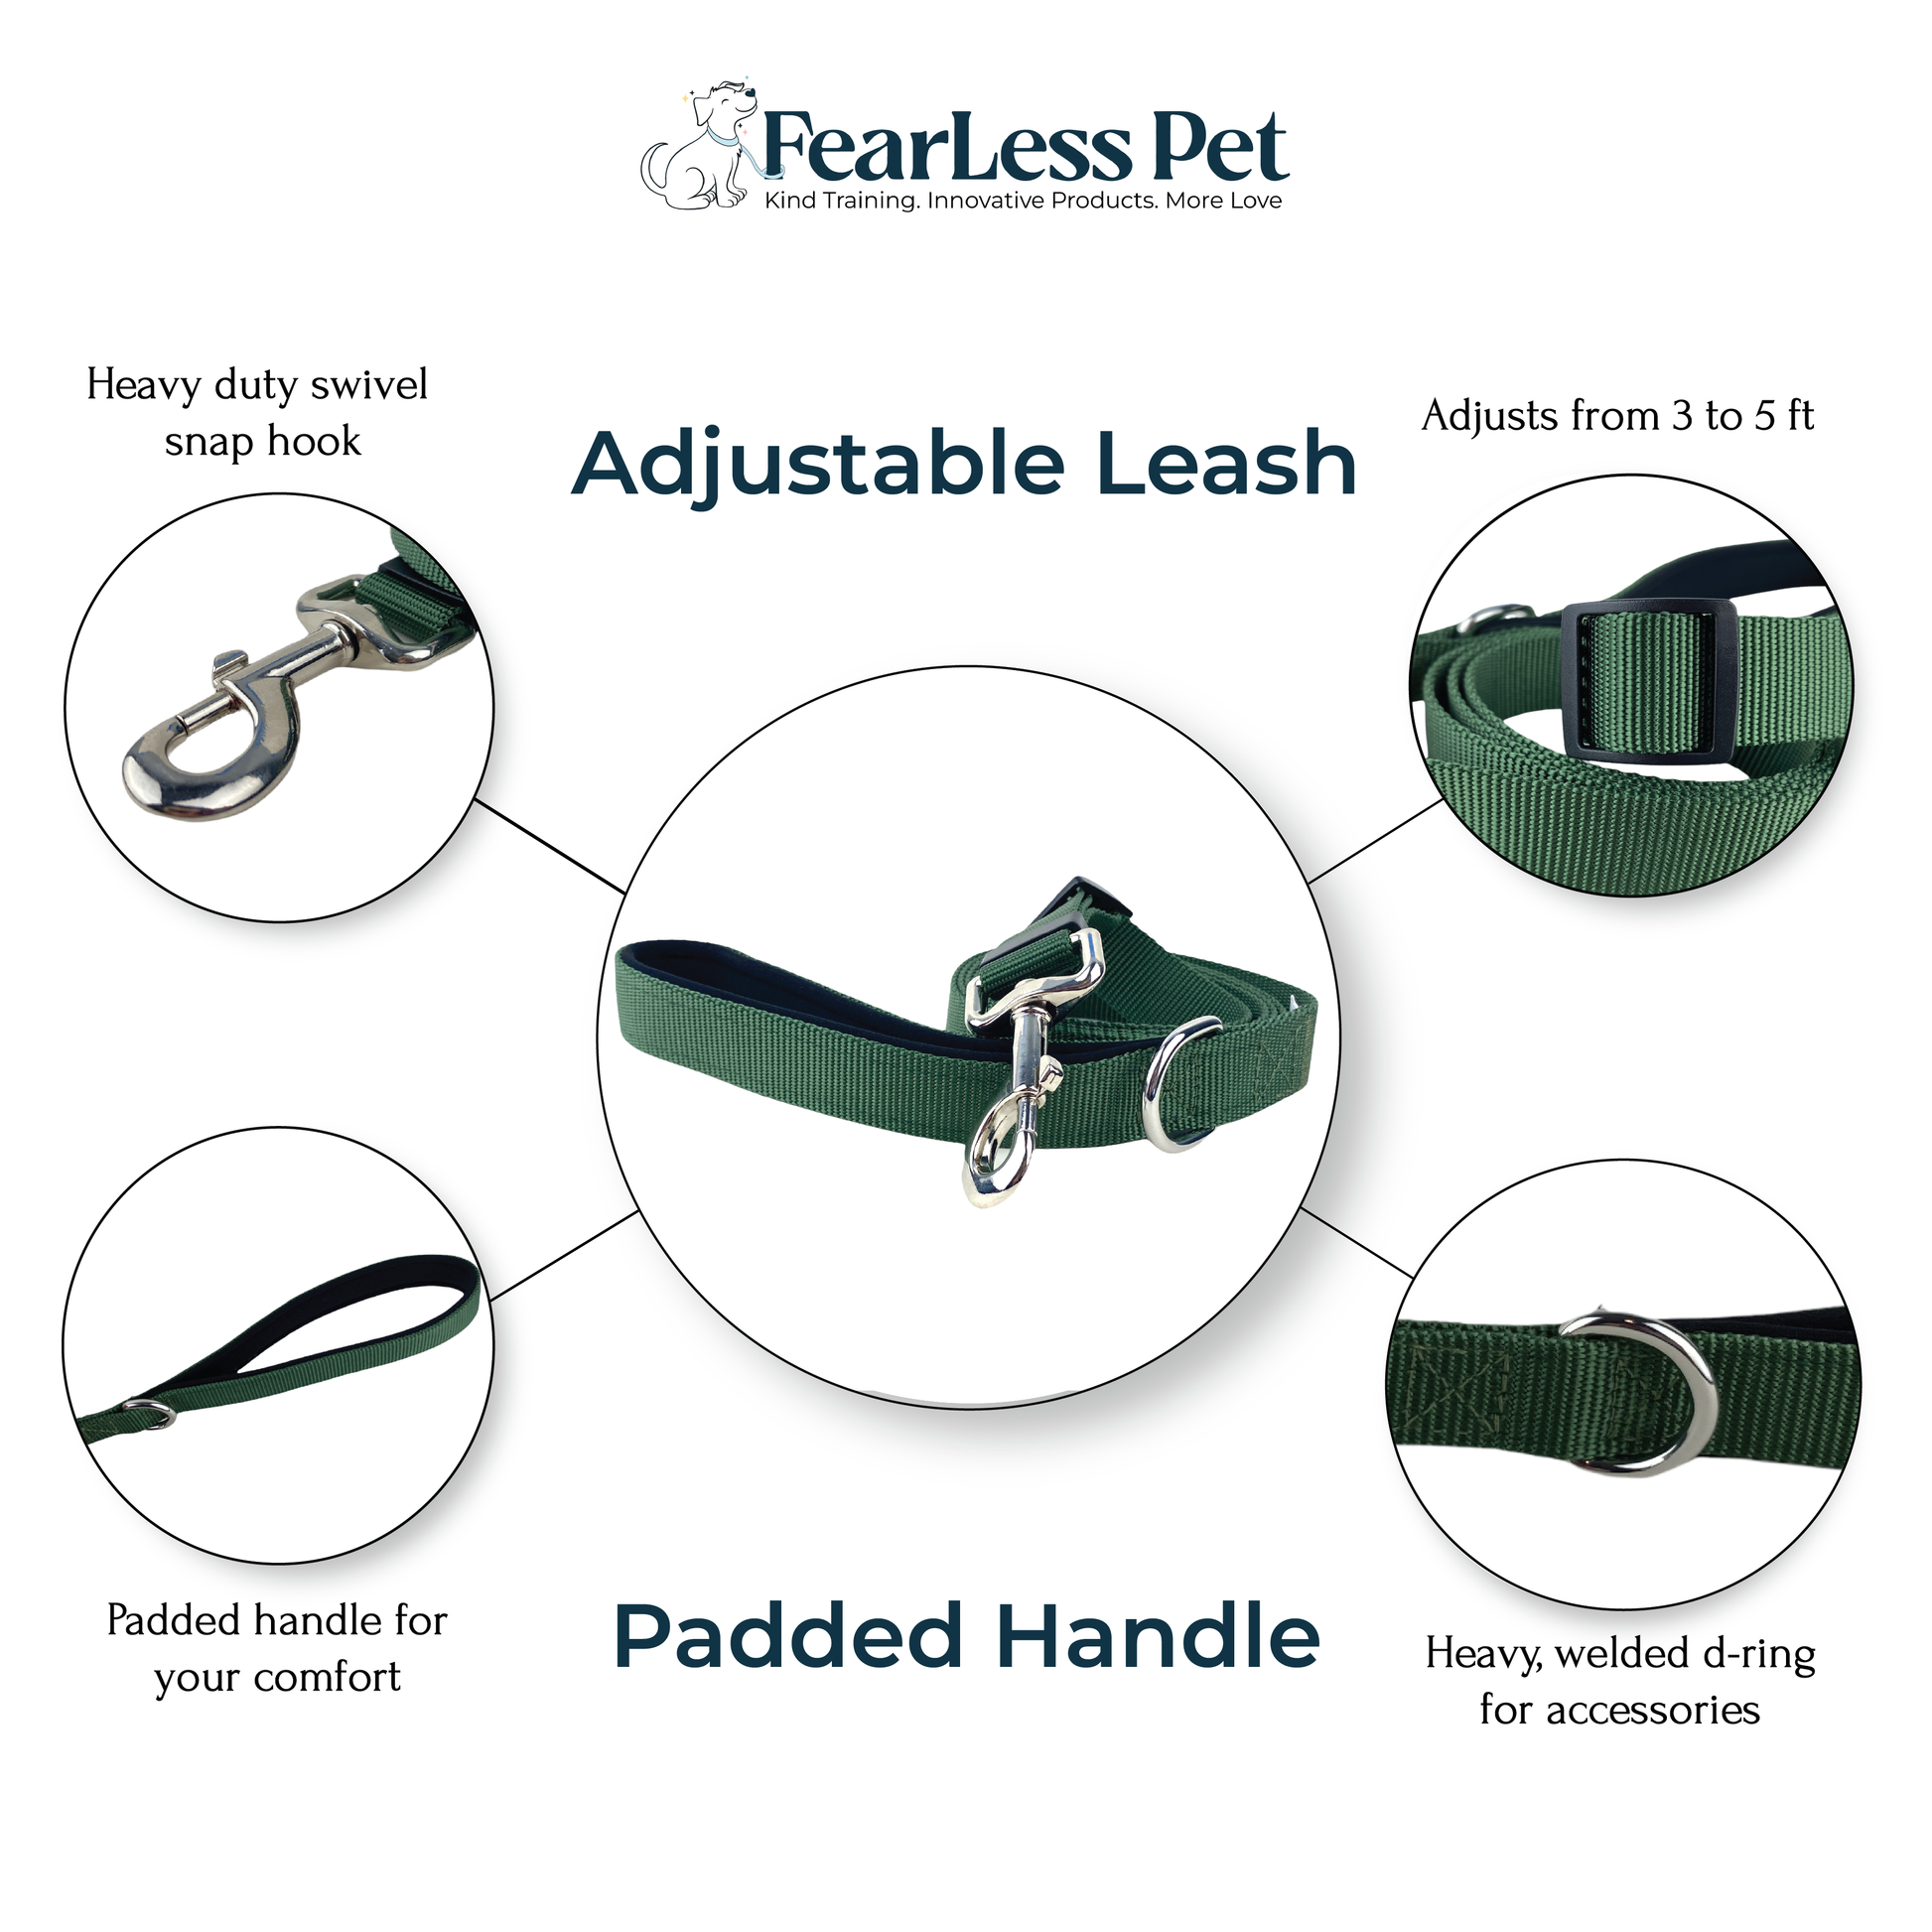 an infographic showing details of an adjustable leash with padded handle from fearless pet